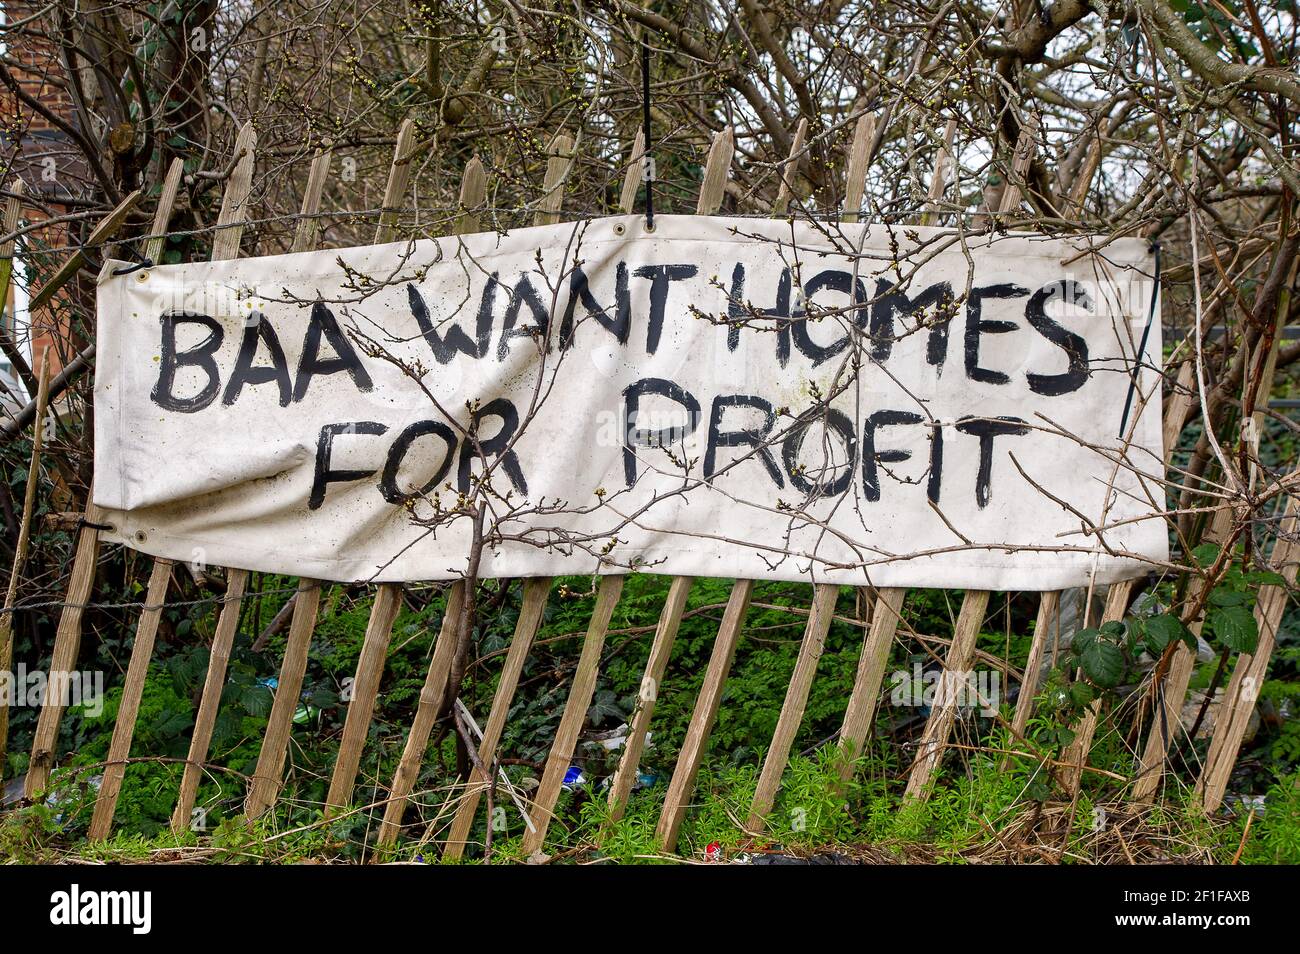 Sipson, UK. 8th March, 2021. A BBA Want Homes for Profit banner outside a house in Sipson. The fight by local residents and environmentalists to the stop the third runway at London Heathrow continues. Last year the Supreme Court reversed a decision to stop plans for a third runway at Heathrow Airport. Developers are now able to seek planning permission for the controversial third runway. Not only would the number of flights from London Heathrow increase dramatically but they would be flying at lower heights causing more noise and pollution to residents. Credit: Maureen McLean/Alamy Stock Photo